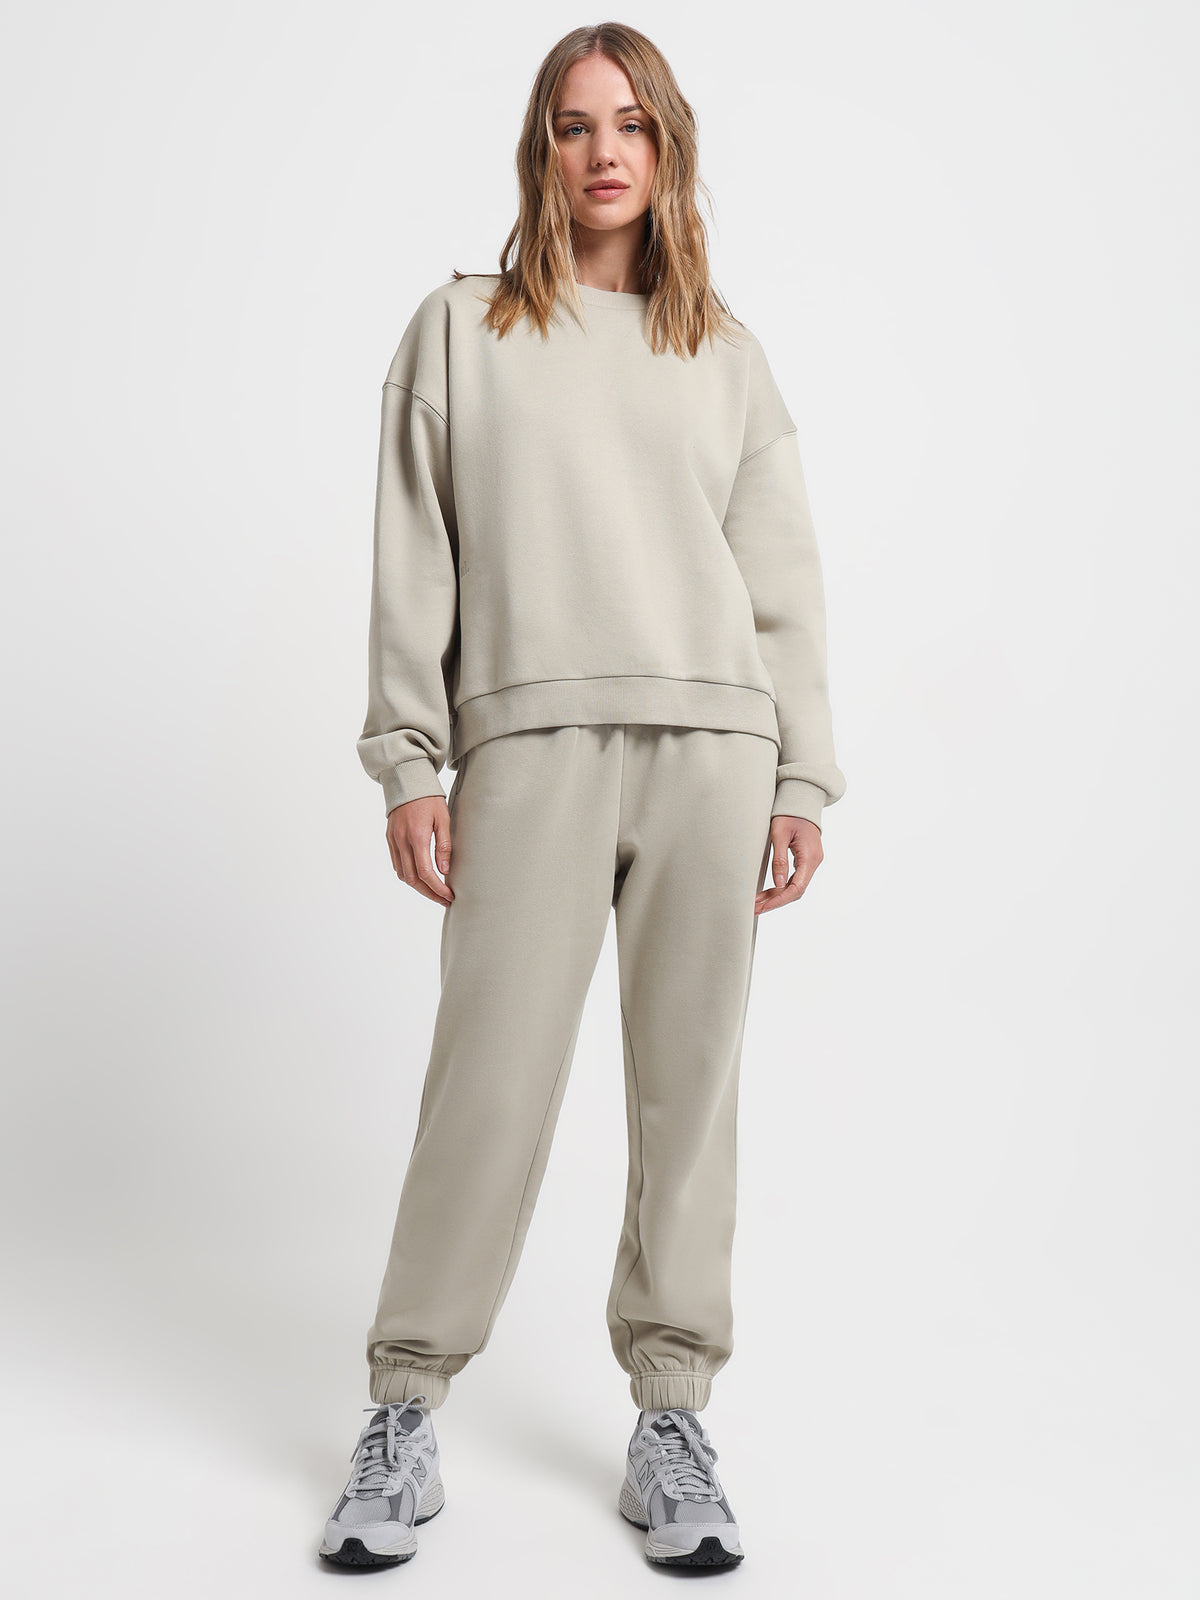 Carter Curated Track Pants in Artichoke